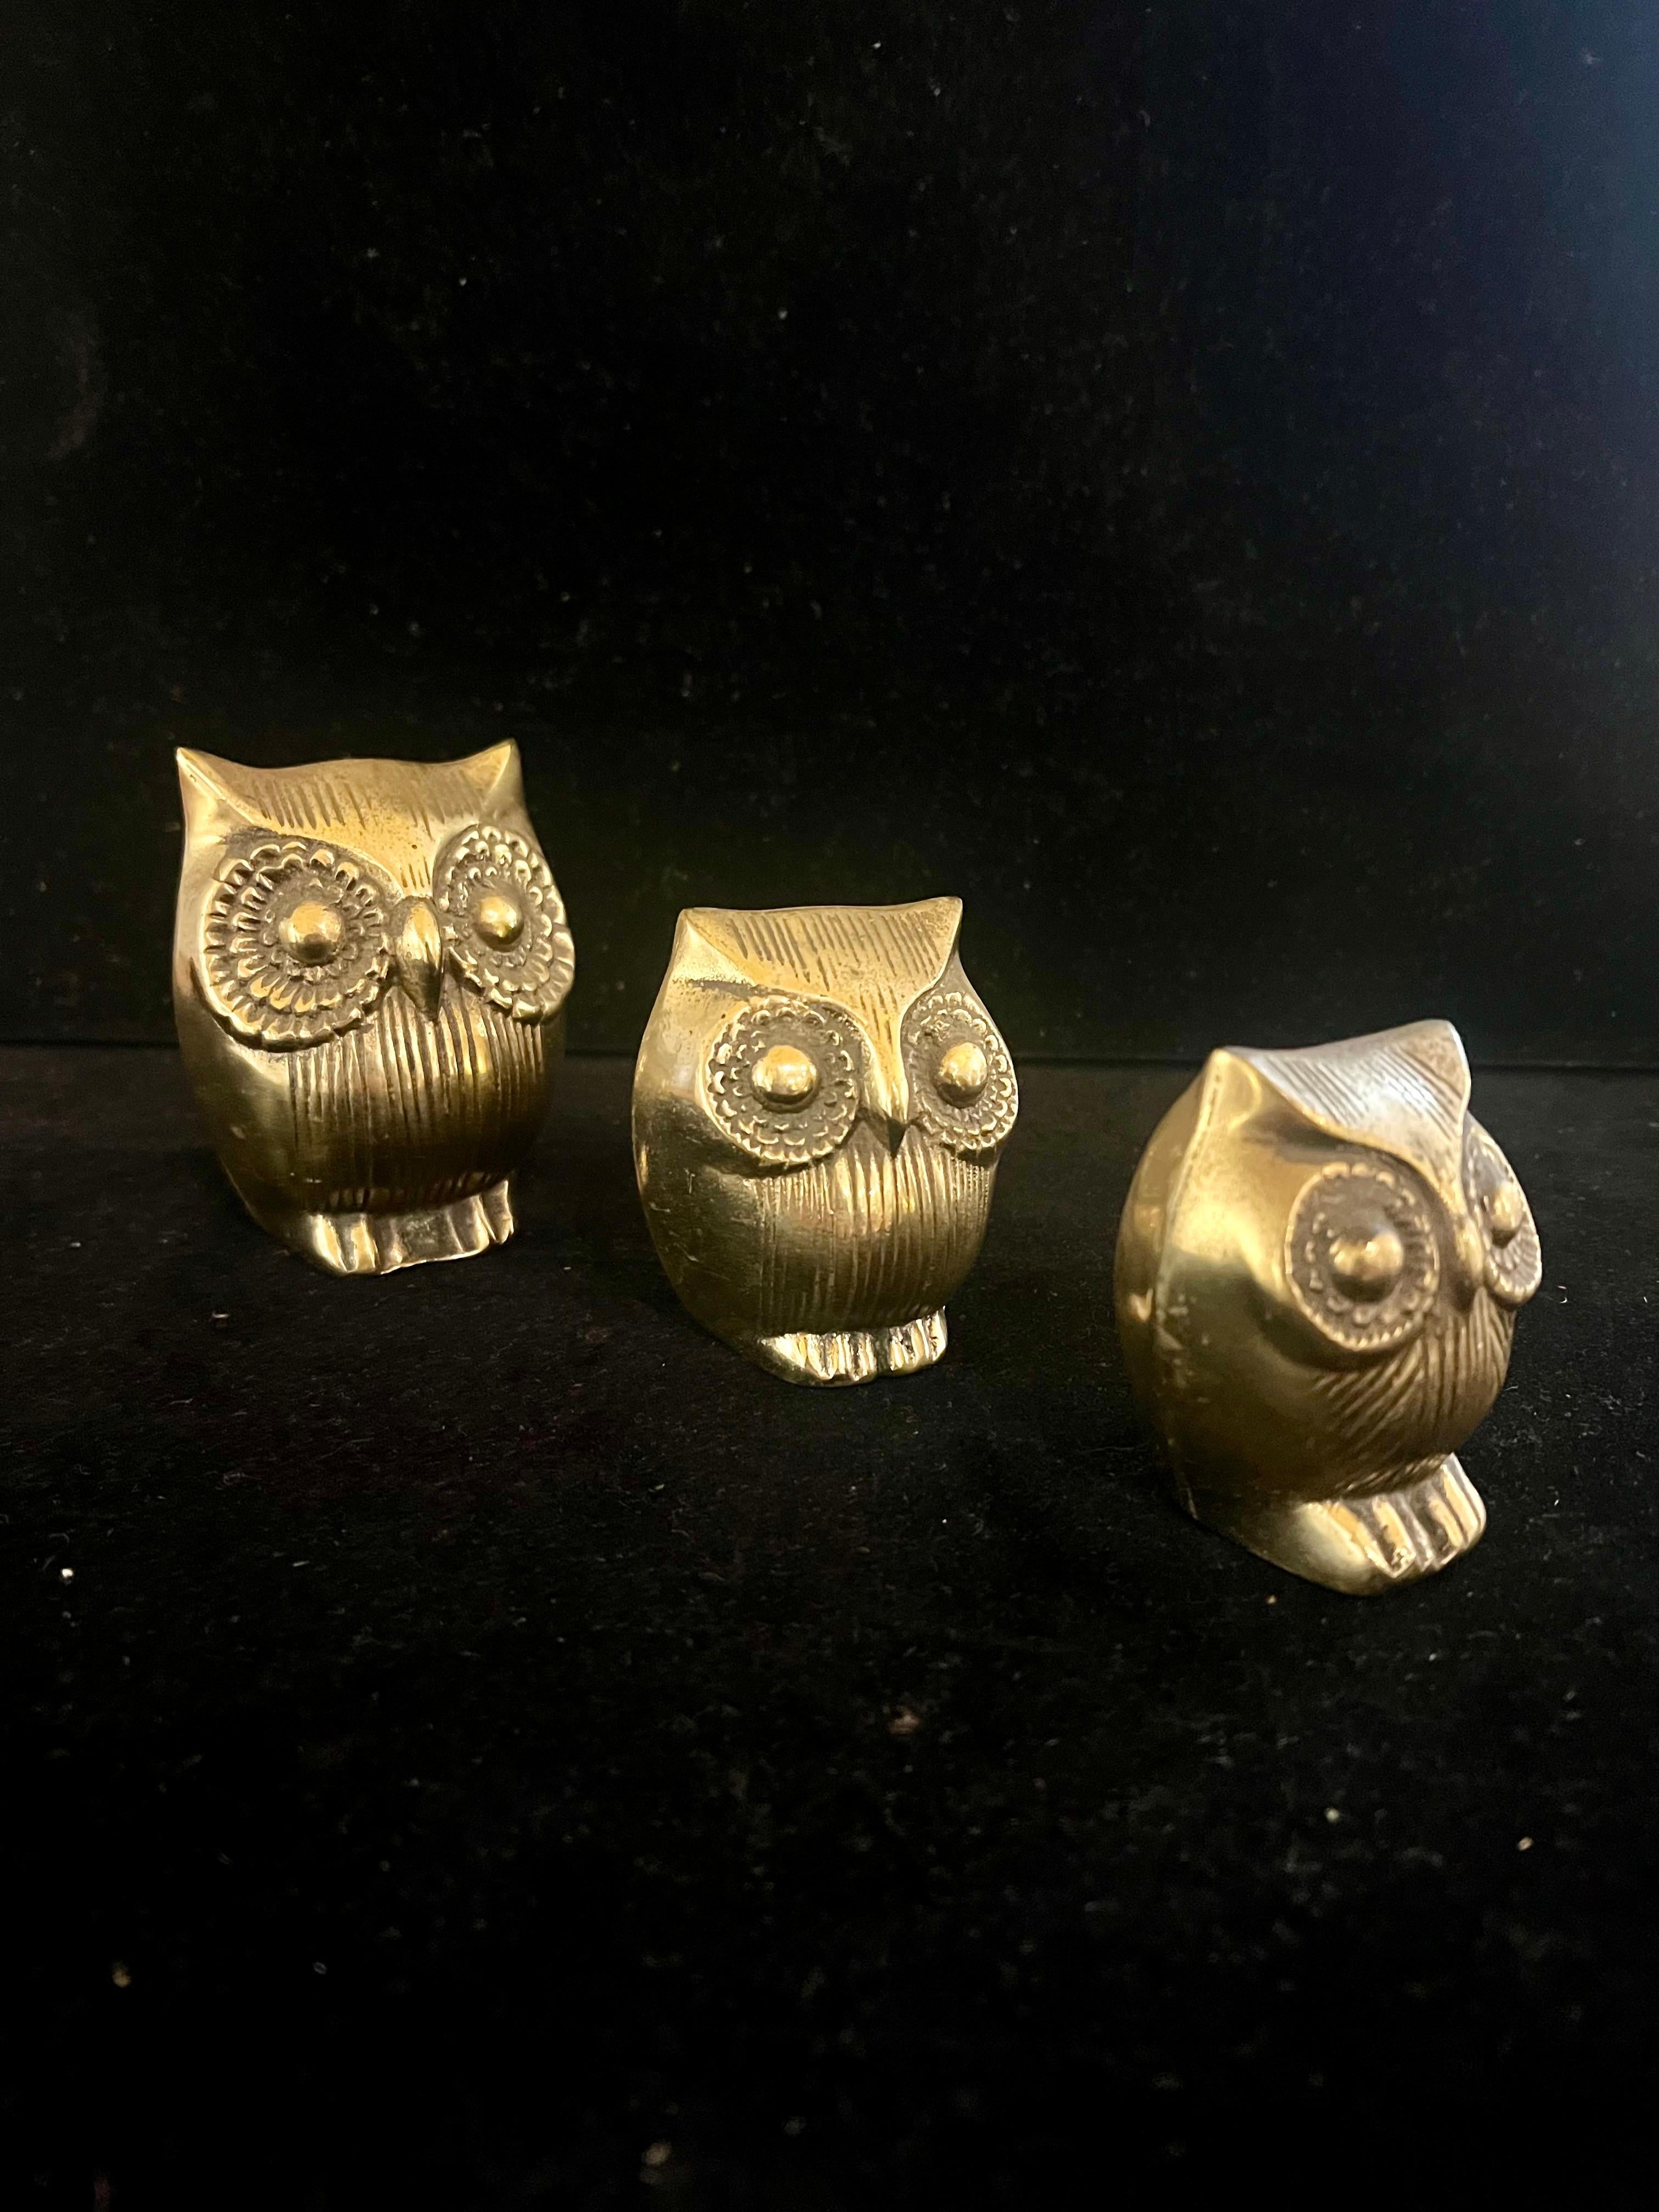 Whimsical set of 3 patinated brass Owls, circa 1960's Hippies era nice condition very collectible good luck-wise charm.3.5